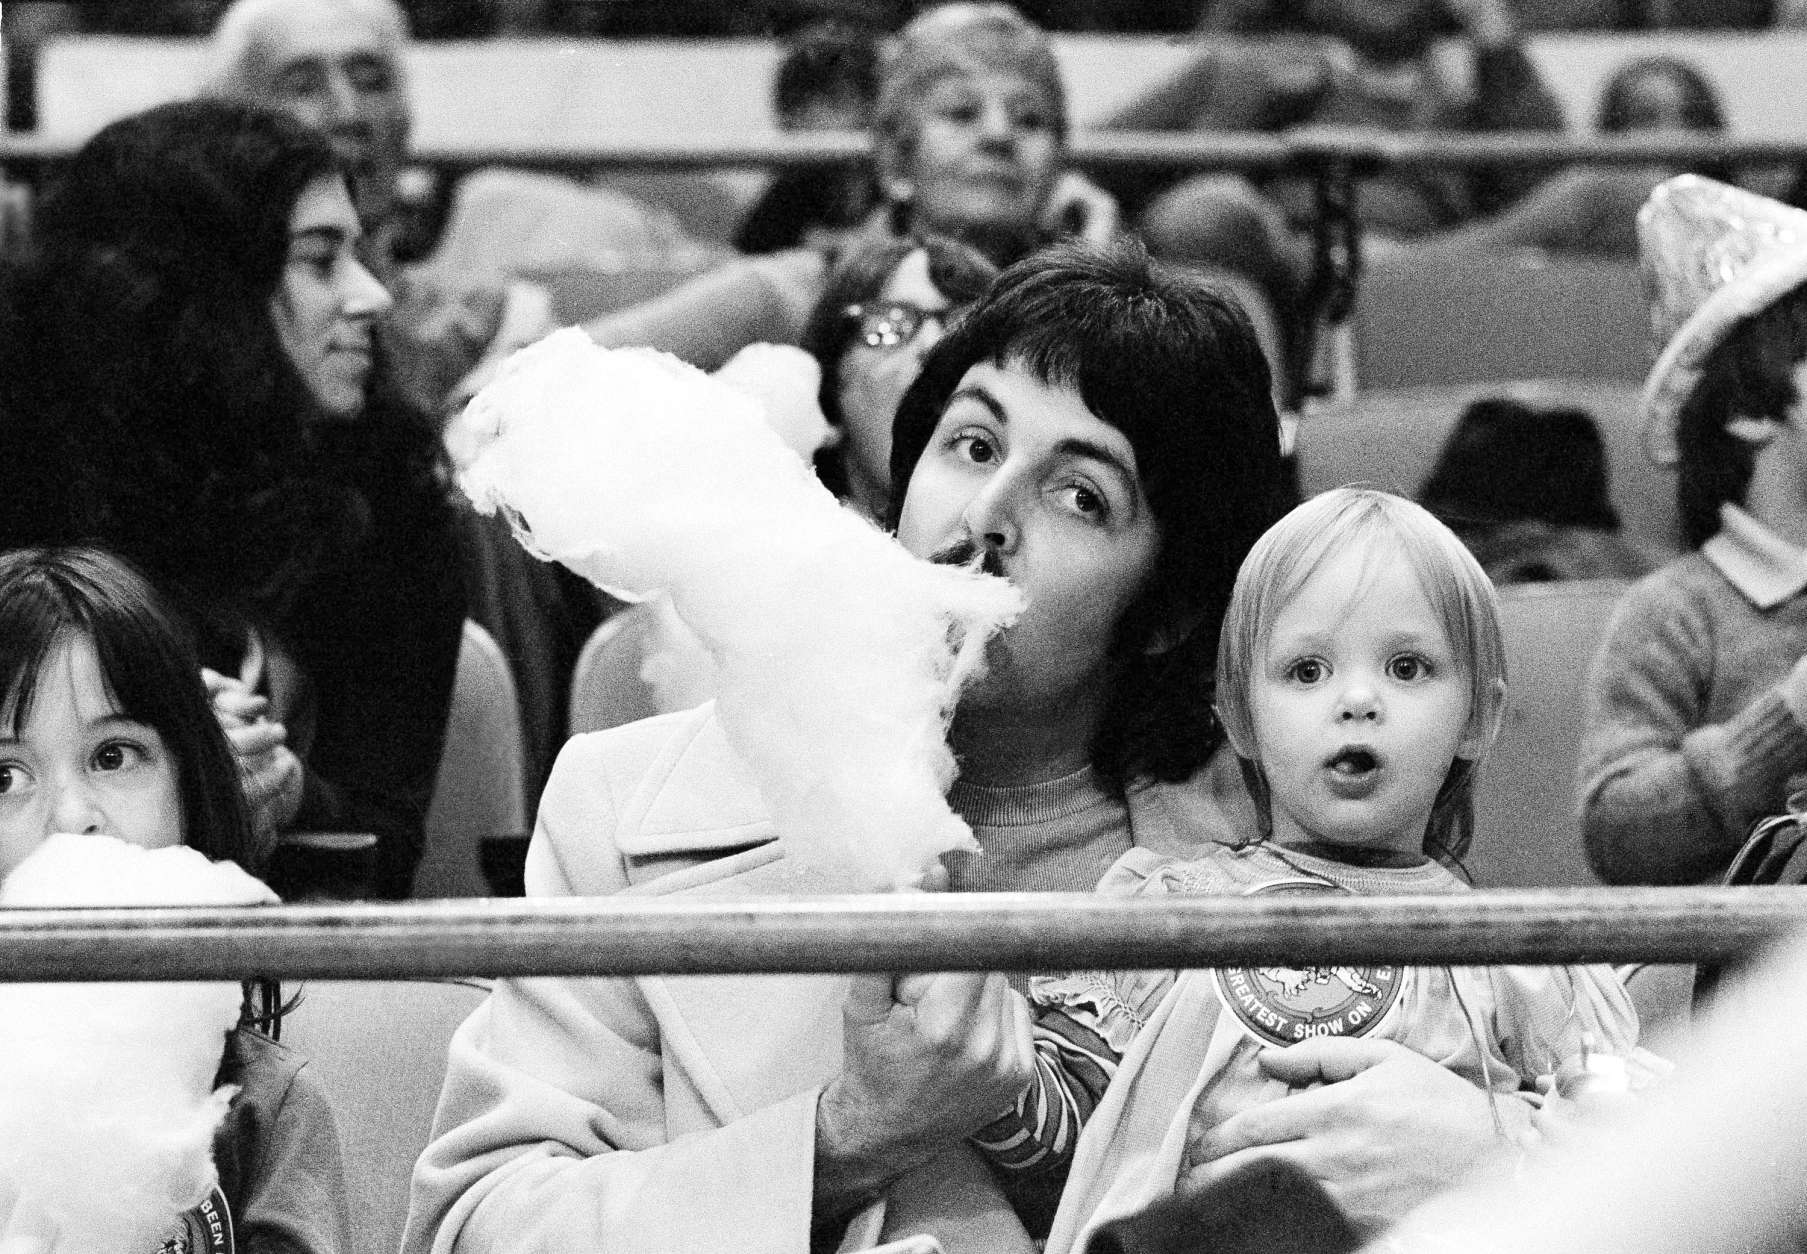 Former Beatle Paul McCartney samples his young daughter Stella's cotton candy as the two sit on the sidelines at New York's Madison Square Garden, March 30, 1974, watching the Ringling Bros. &amp; Barnum and Bailey Circus. (AP Photo/Suzanne Vlamis)